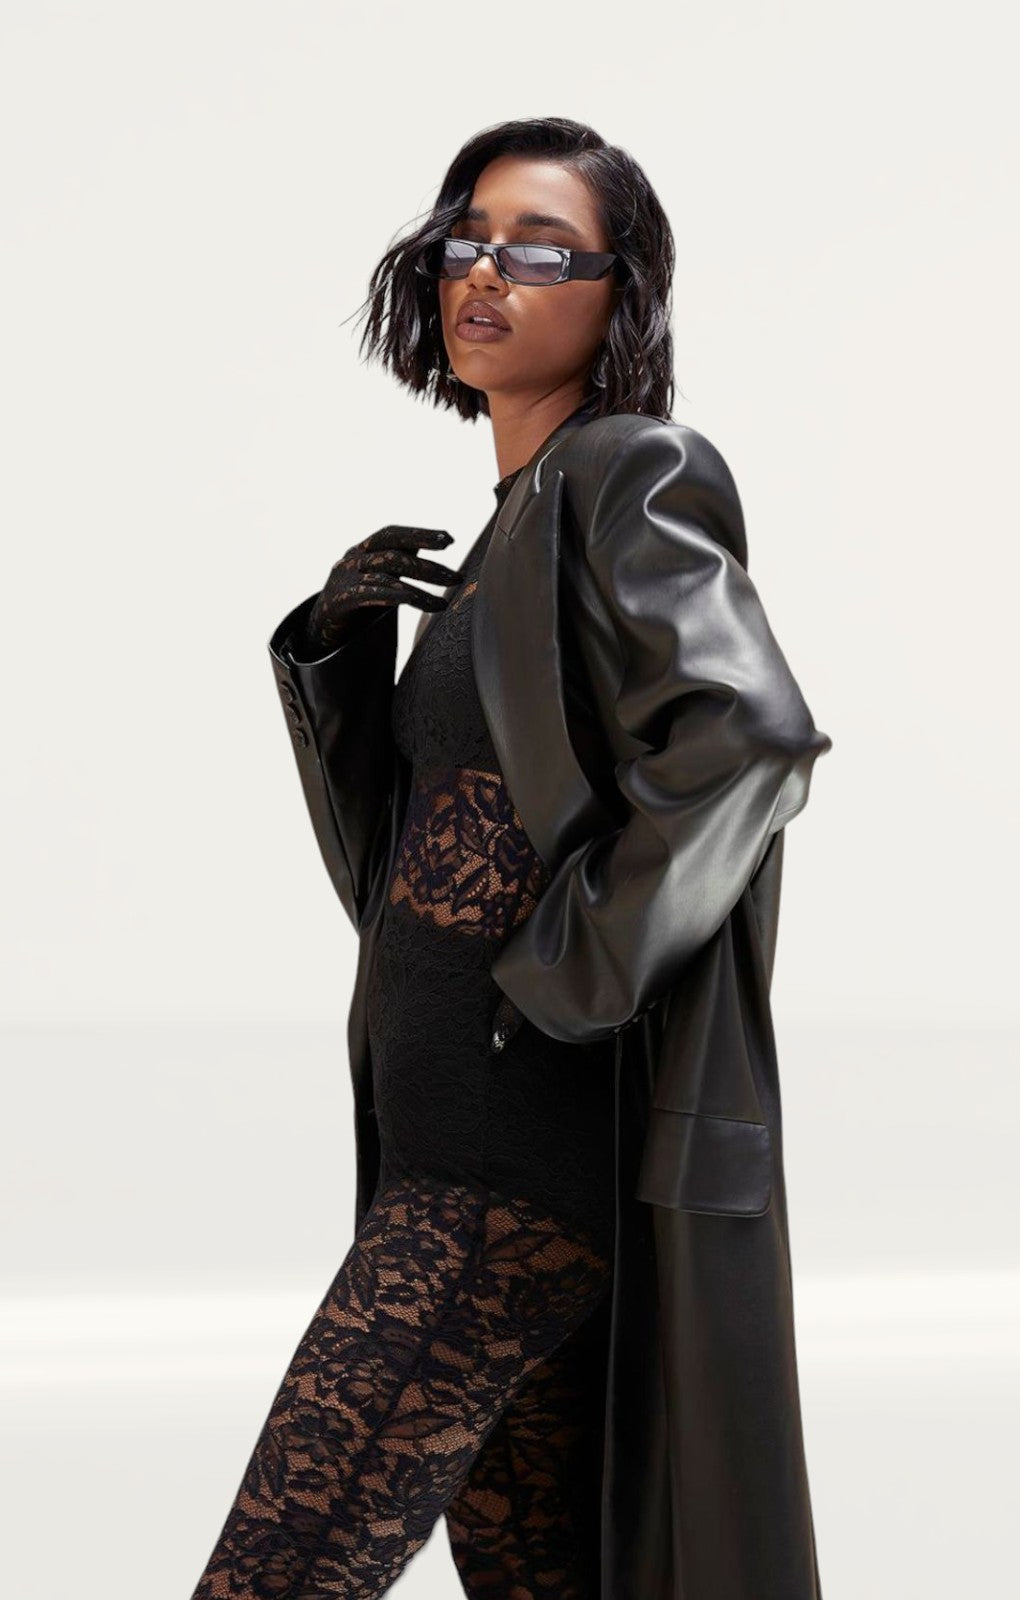 Boohoo Black Faux Leather Trench Coat product image